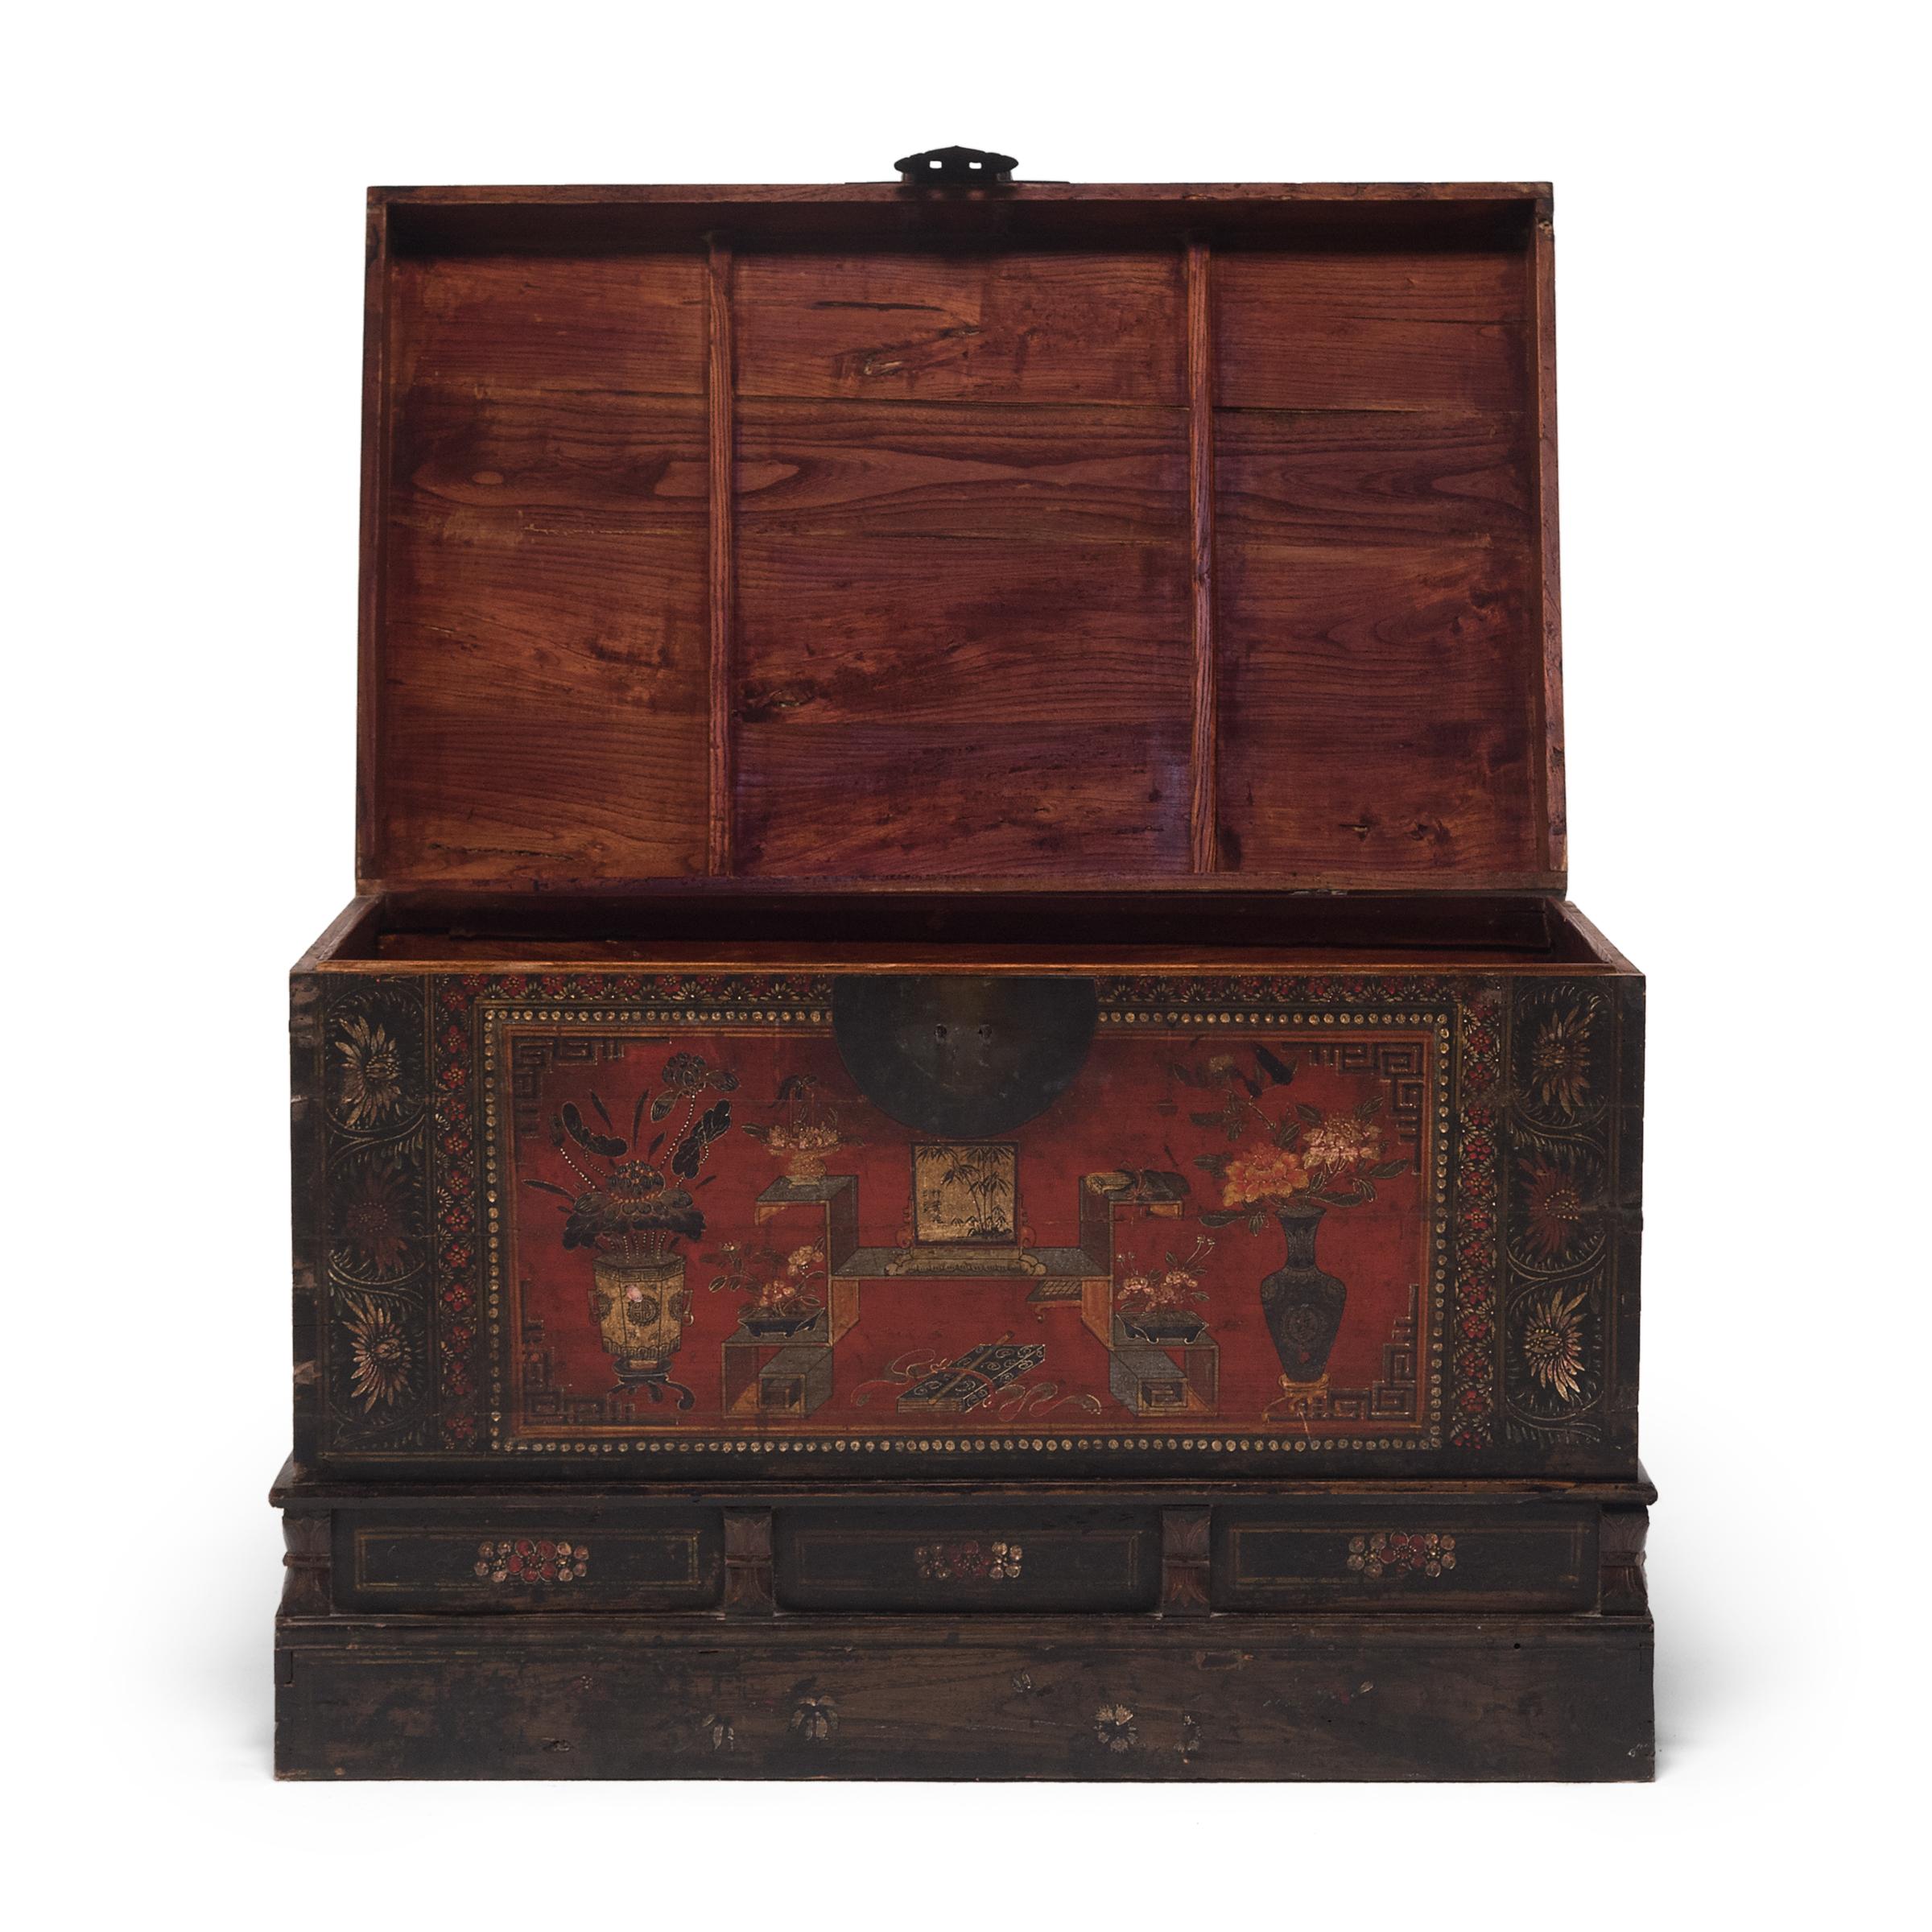 19th Century Chinese Painted Book Chest, c. 1850